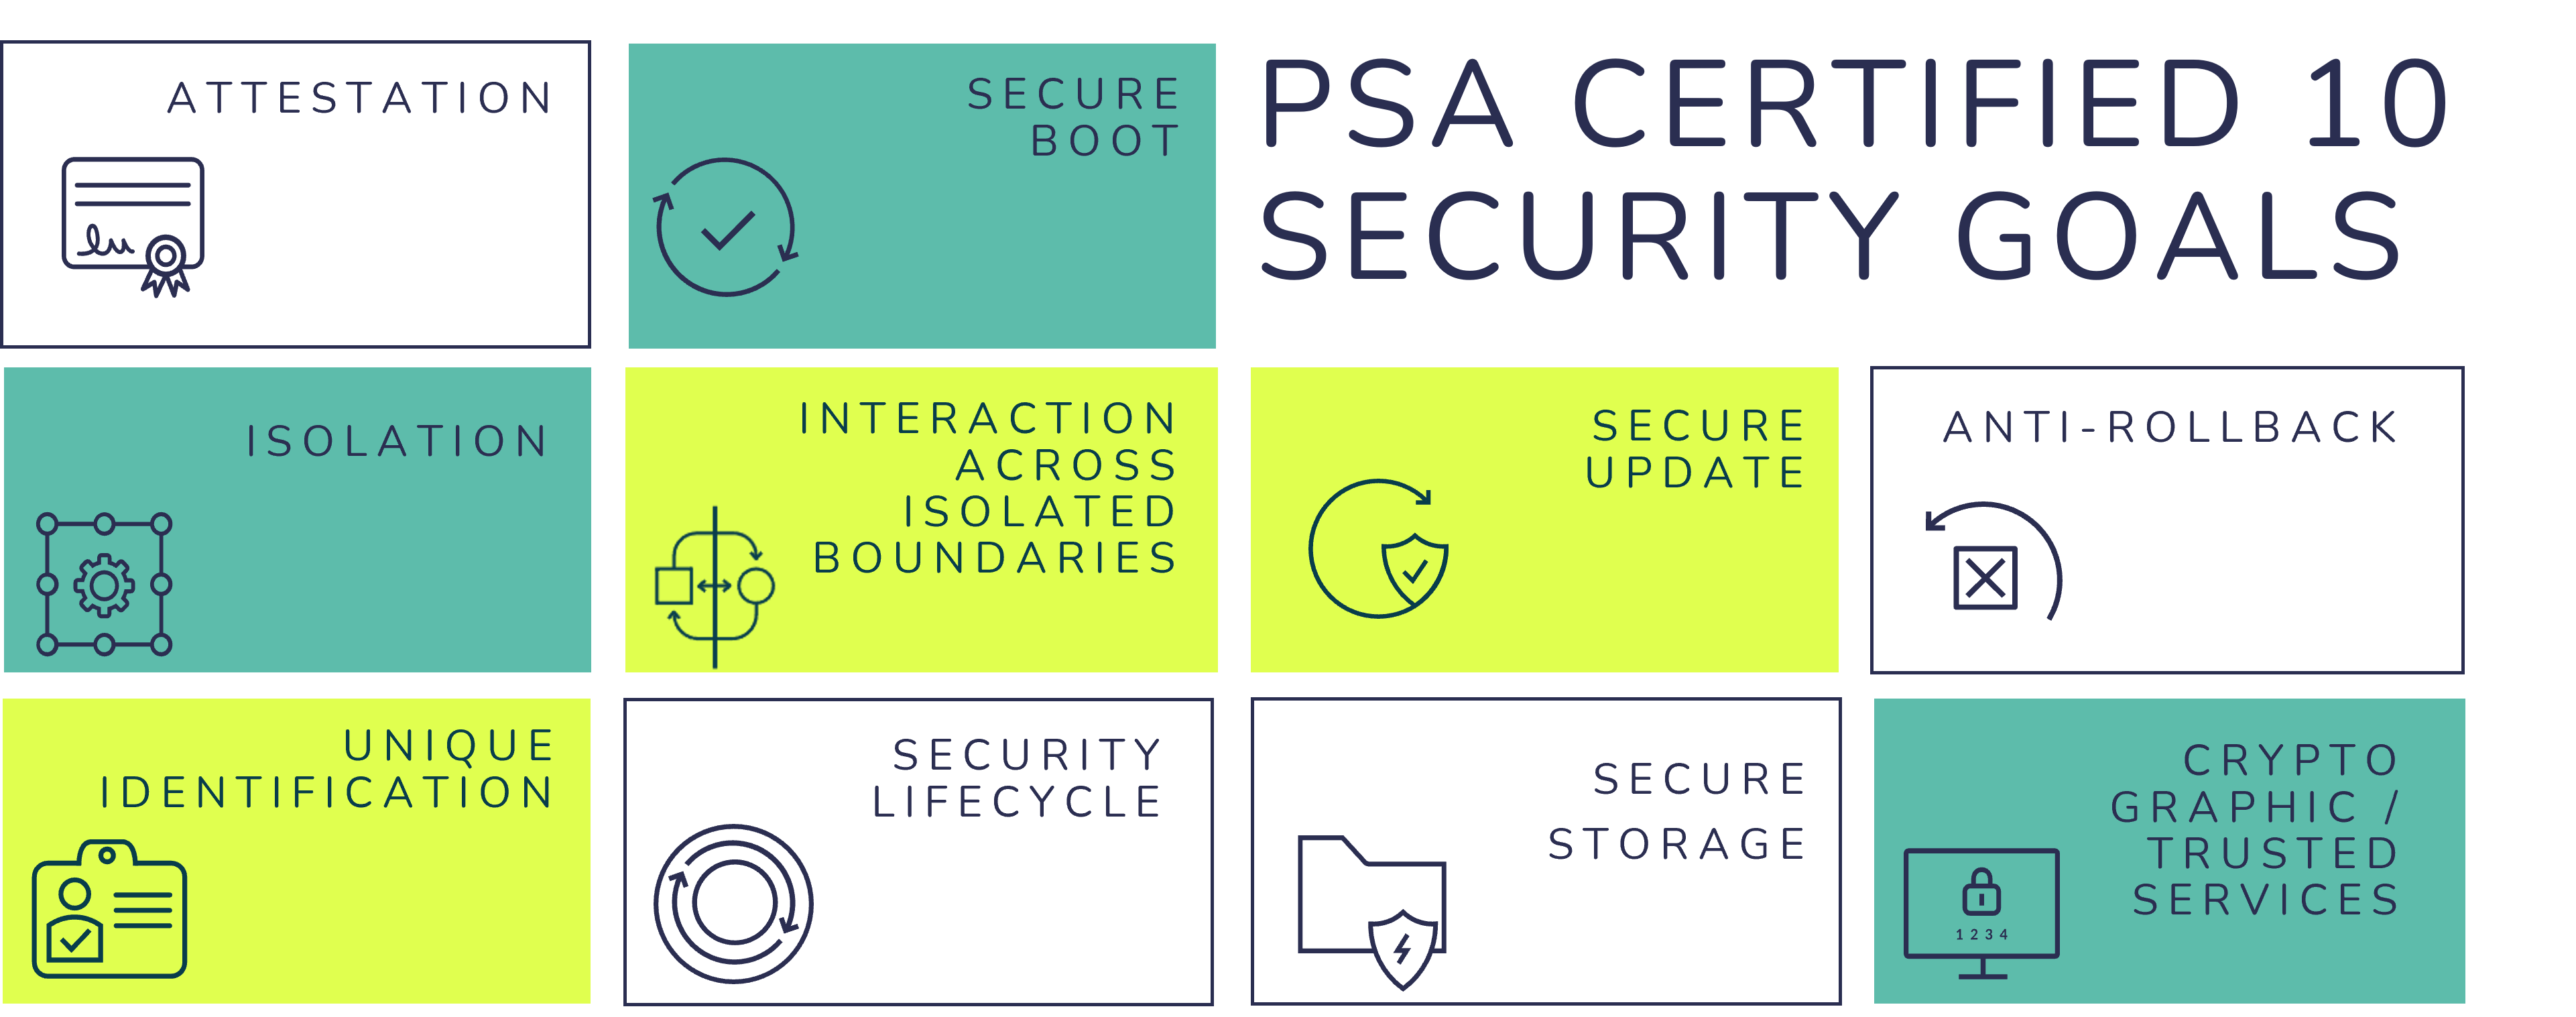 Attestation is one of the PSA Certified 10 Security Goals which highlight the key security functions that should be implemented in every connected device.